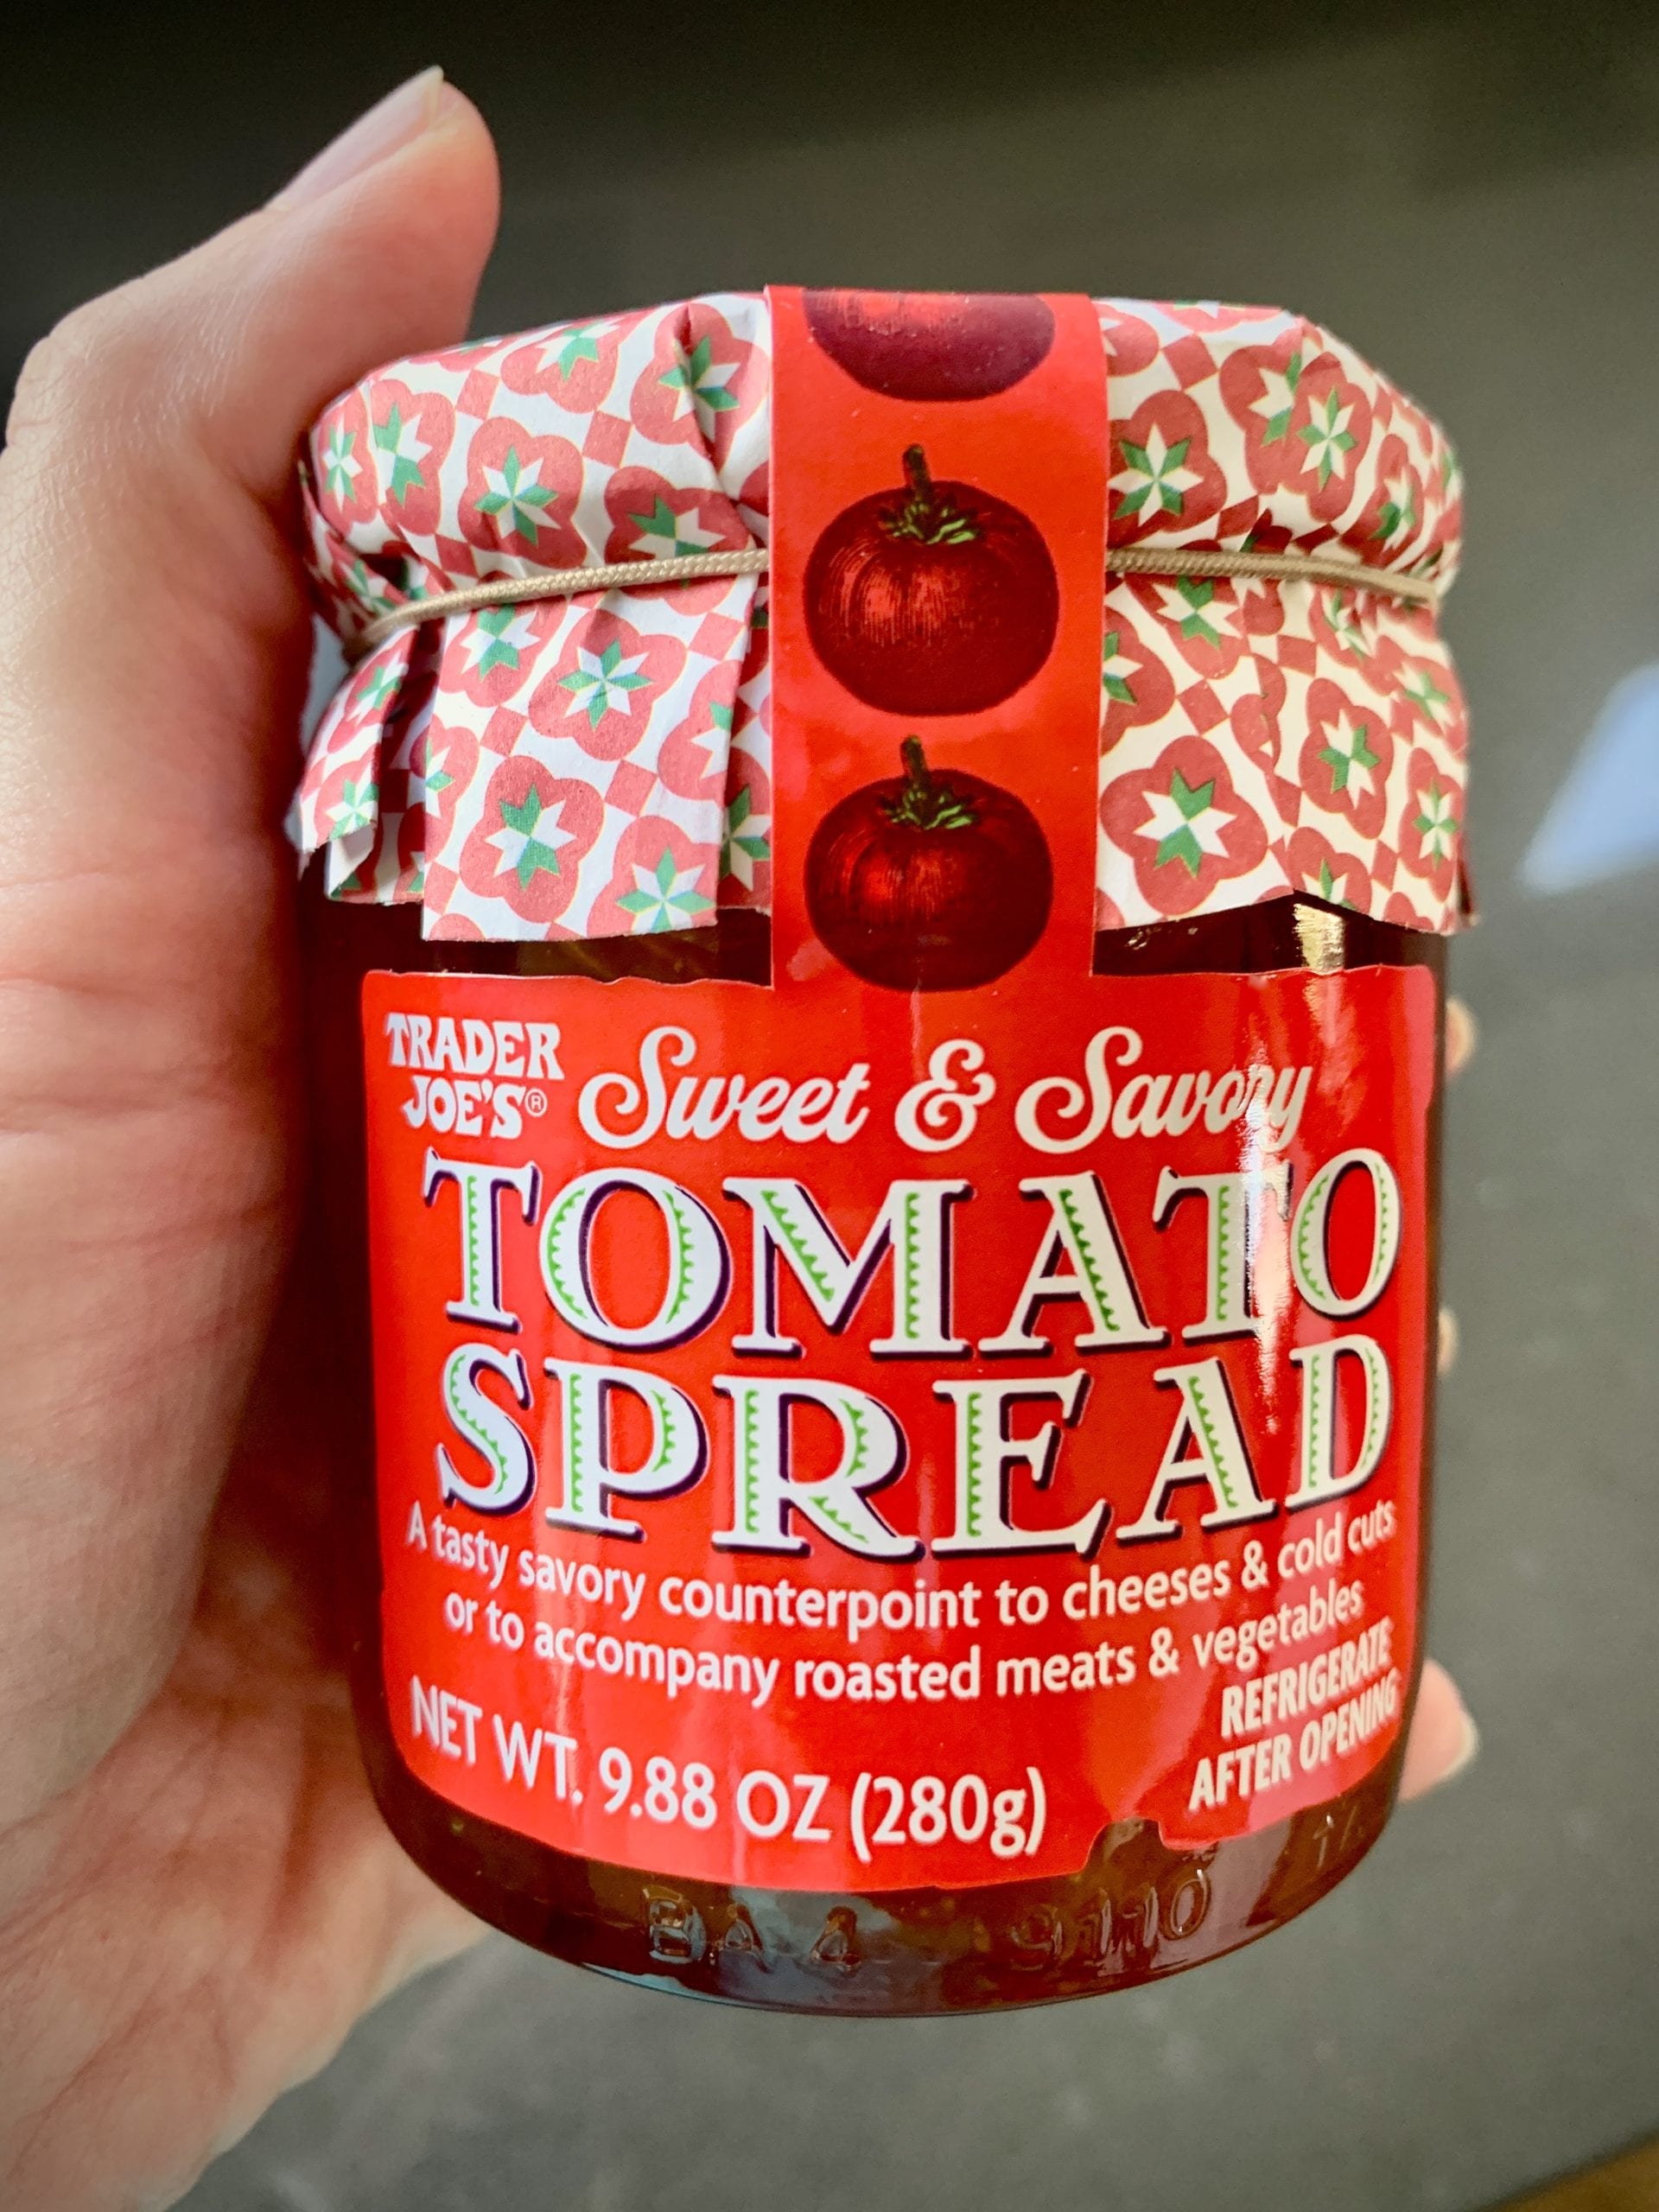 grilled cheese sandwich, trader joe's tomato spread, tomato jam, how to make tomato jam, best tomato jam, how to use tomato jam